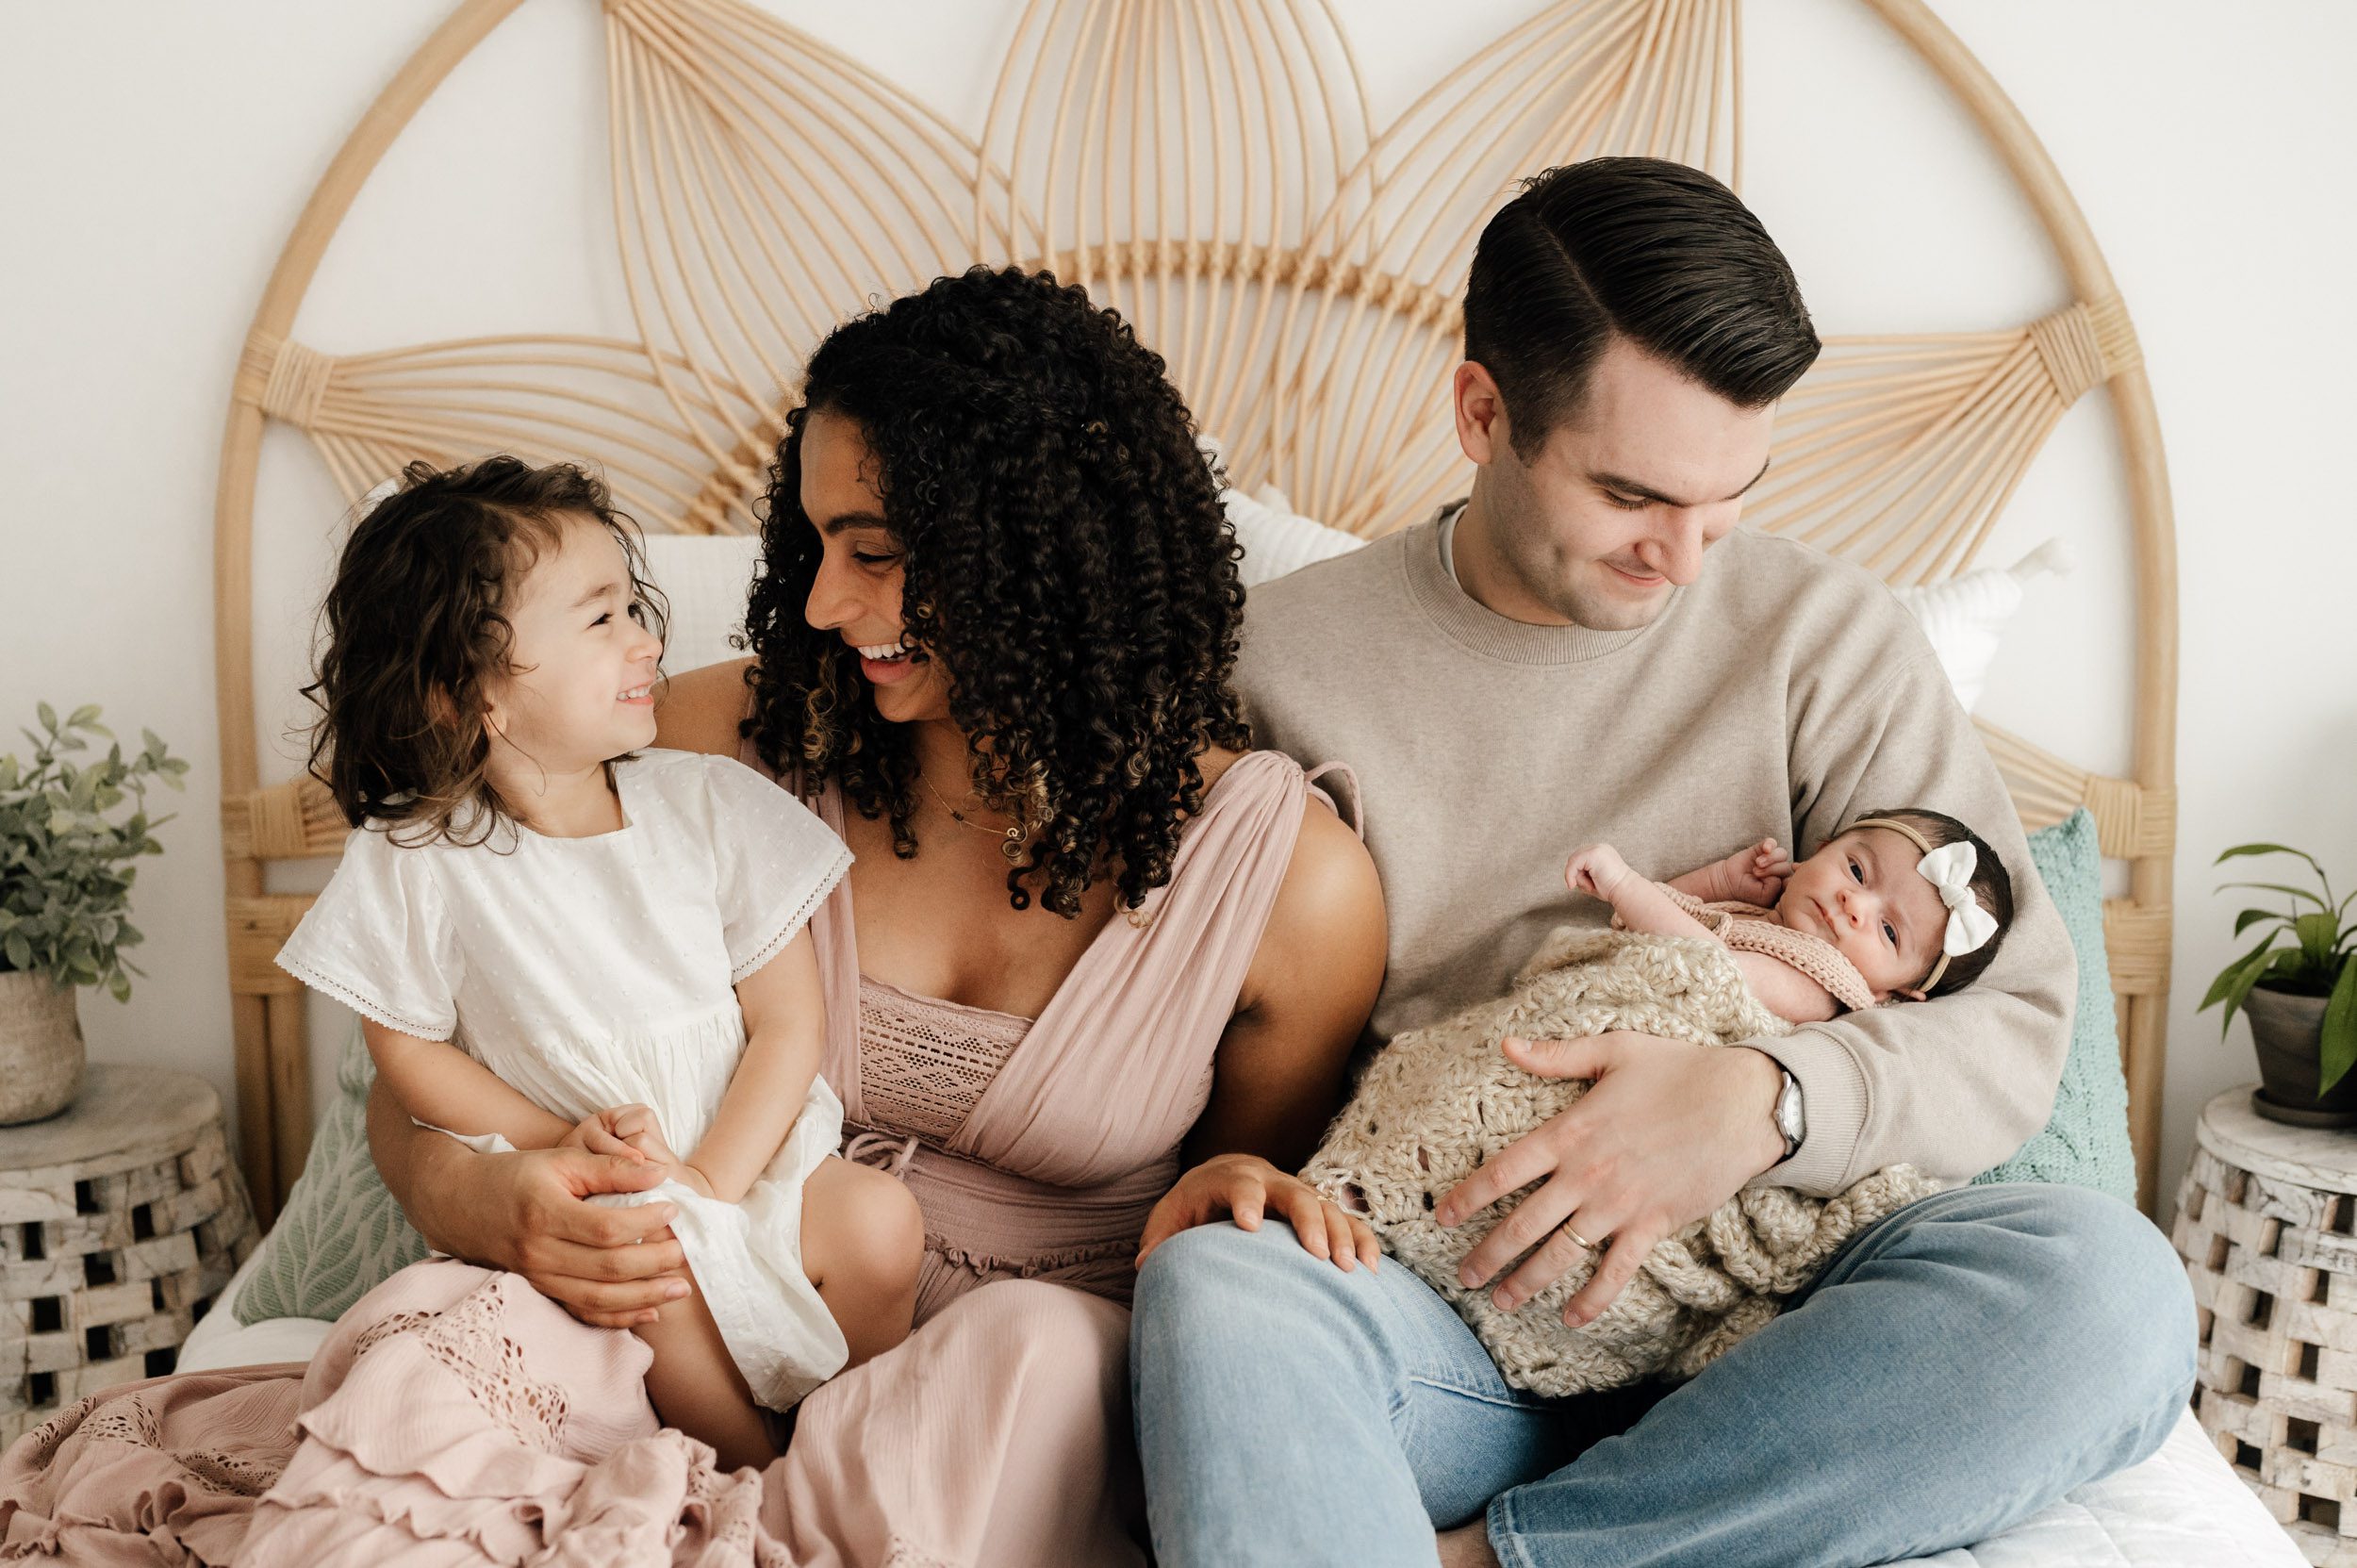 a family of four snuggling on a bed with dad smiling down at his baby girl in his arms and mom holds her older daughter on her lap as they look at each other and laugh during a newborn photoshoot